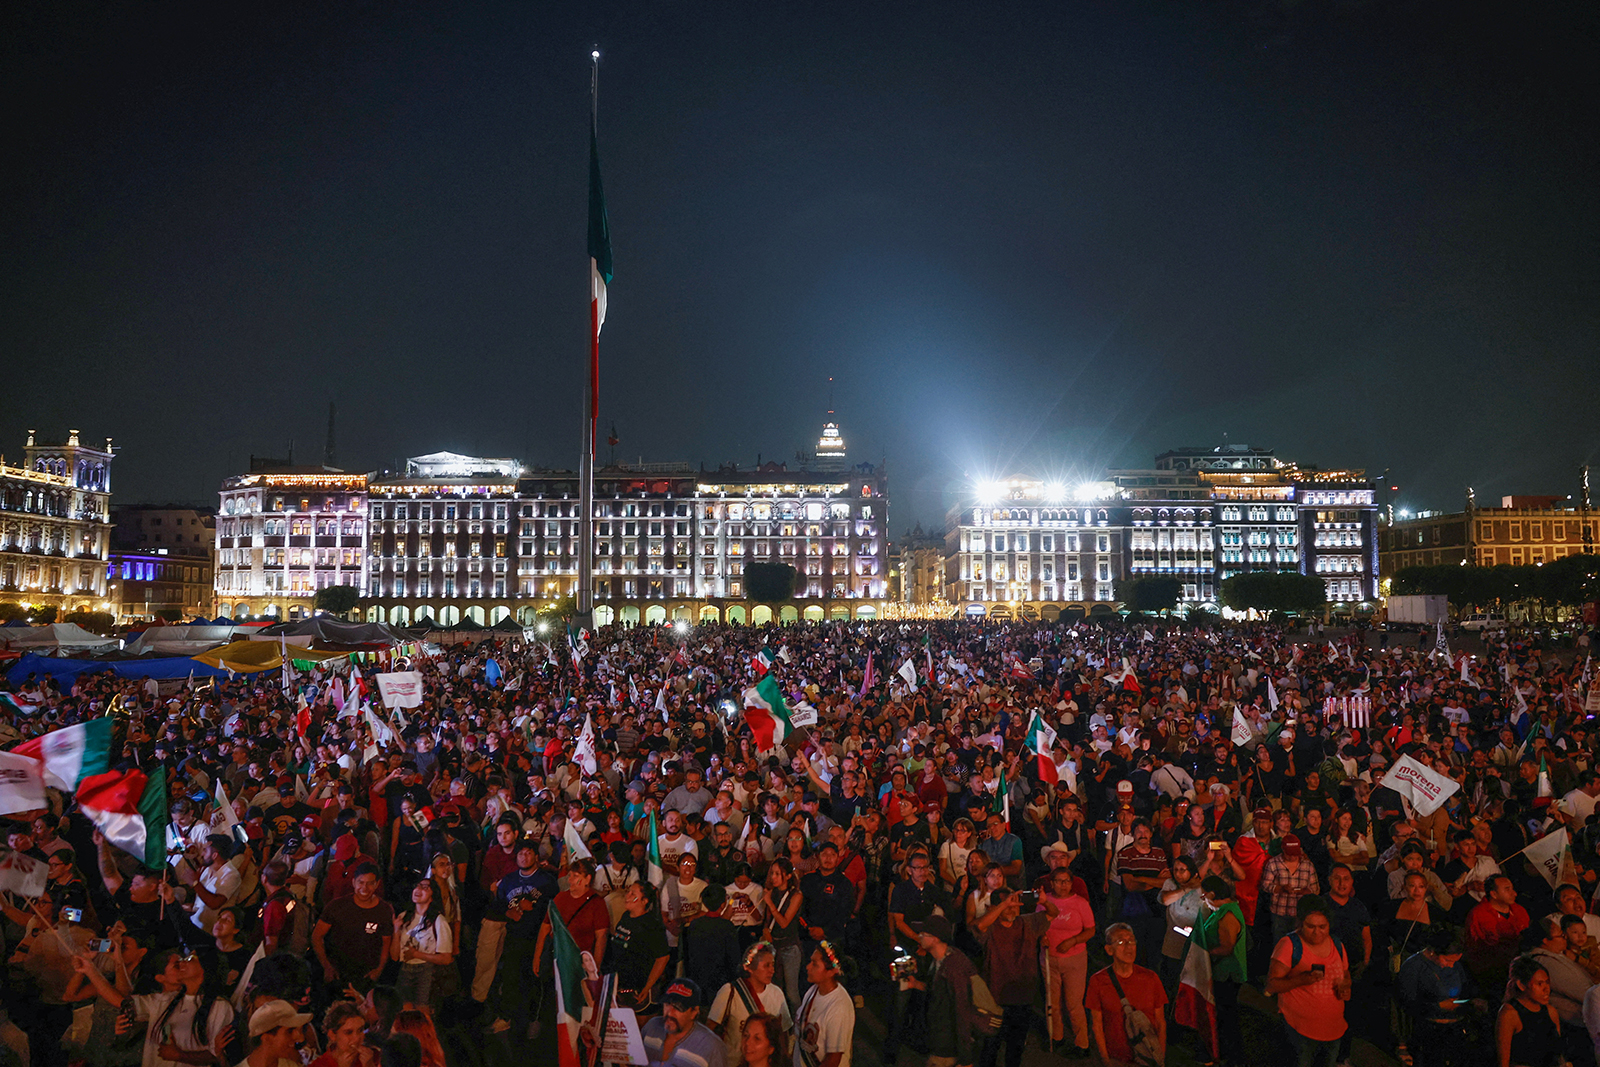 Supporters of Claudia Sheinbaum gather in the Zocalo plaza in Mexico City, Mexico, on June 2.